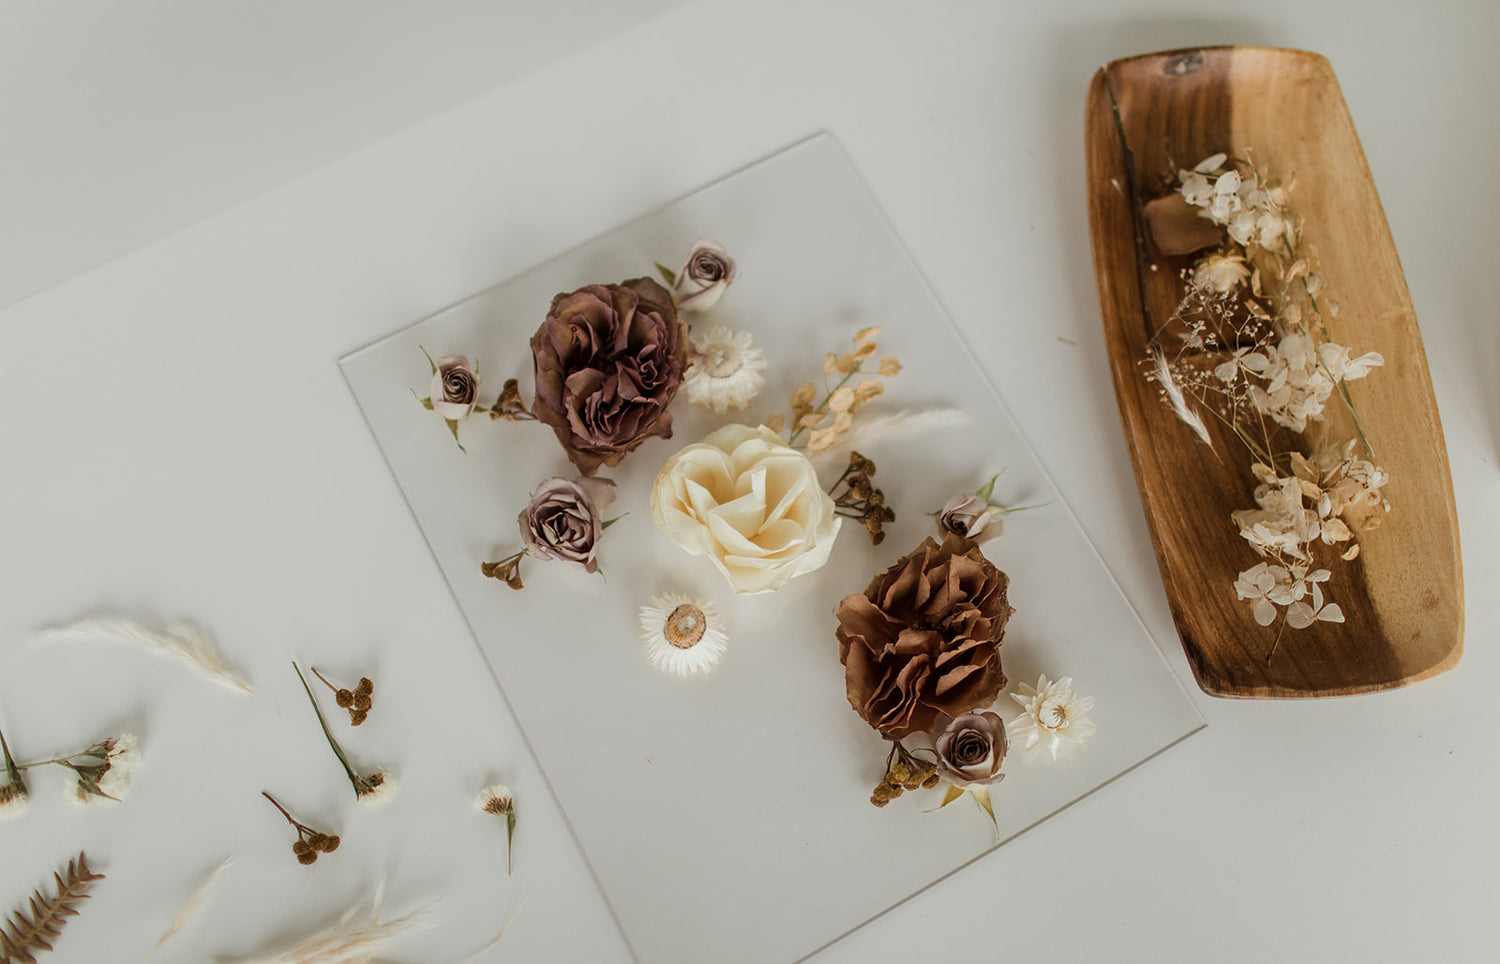 preserved flowers loosely laid on glass